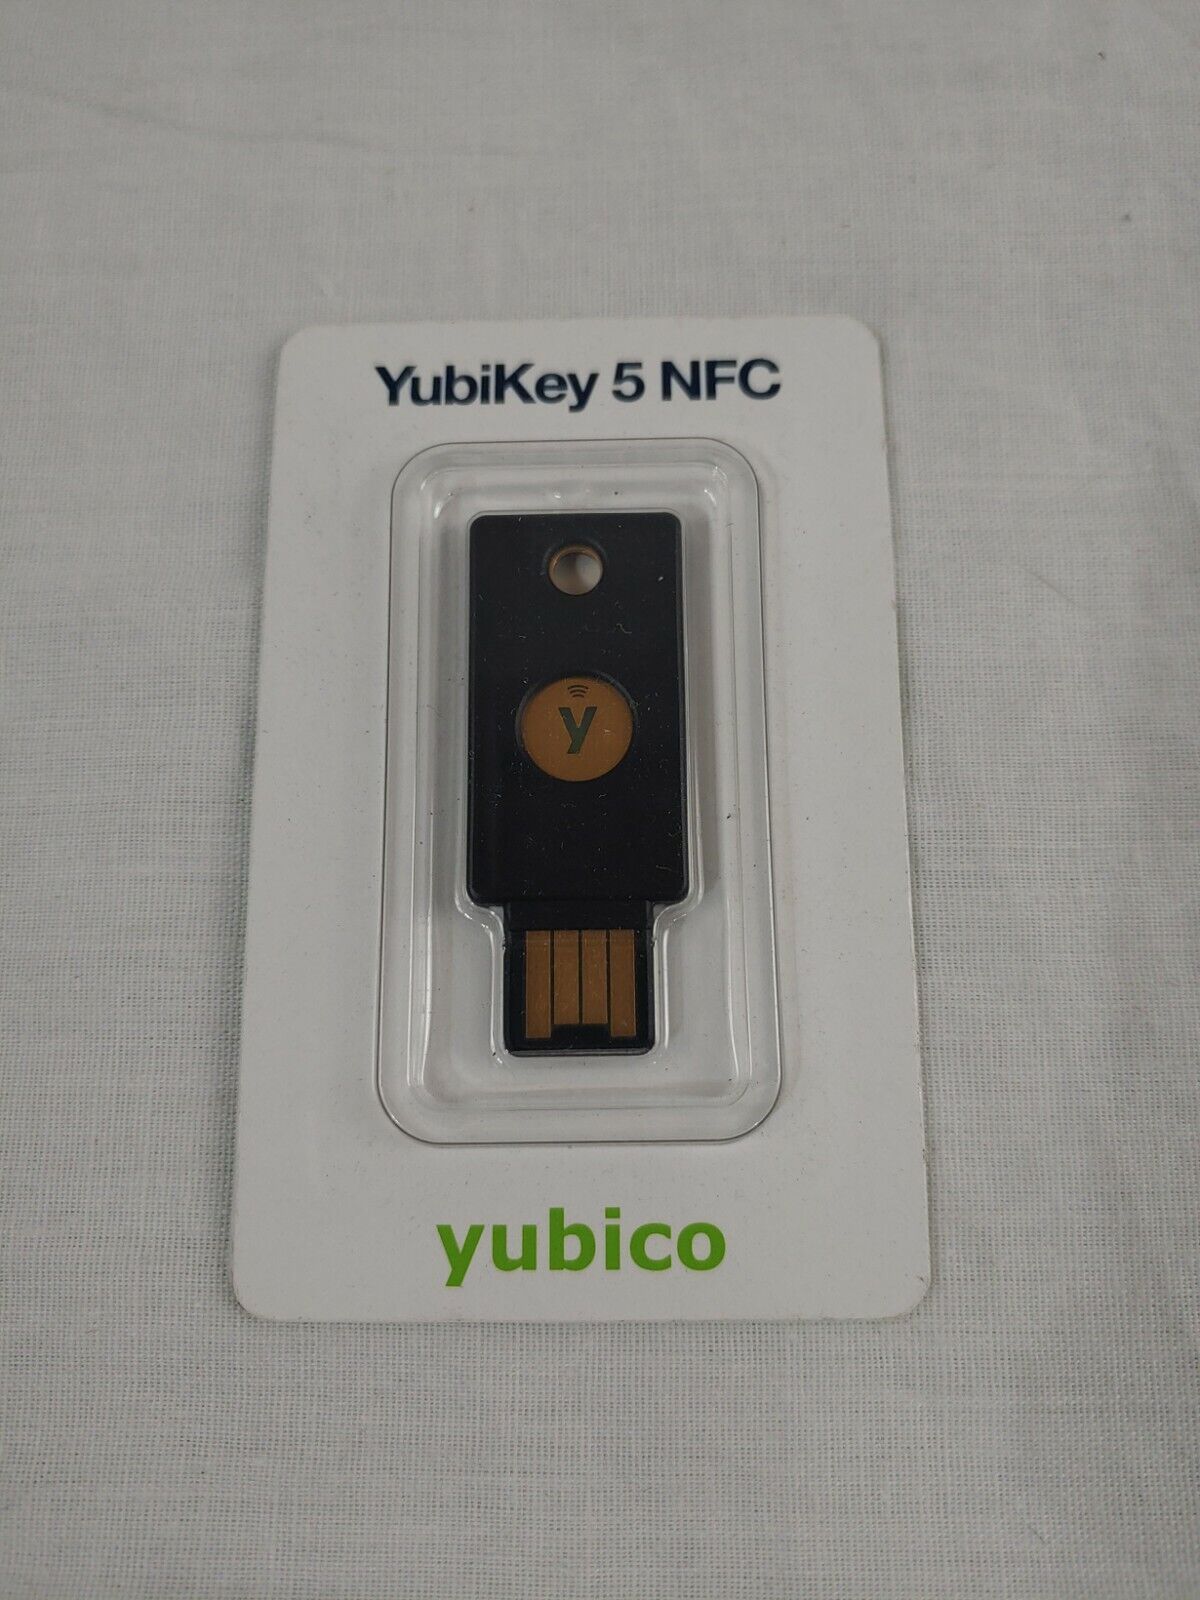 NEW SEALED YUBICO YUBIKEY 5 NFC TWO FACTOR AUTHENTICATION